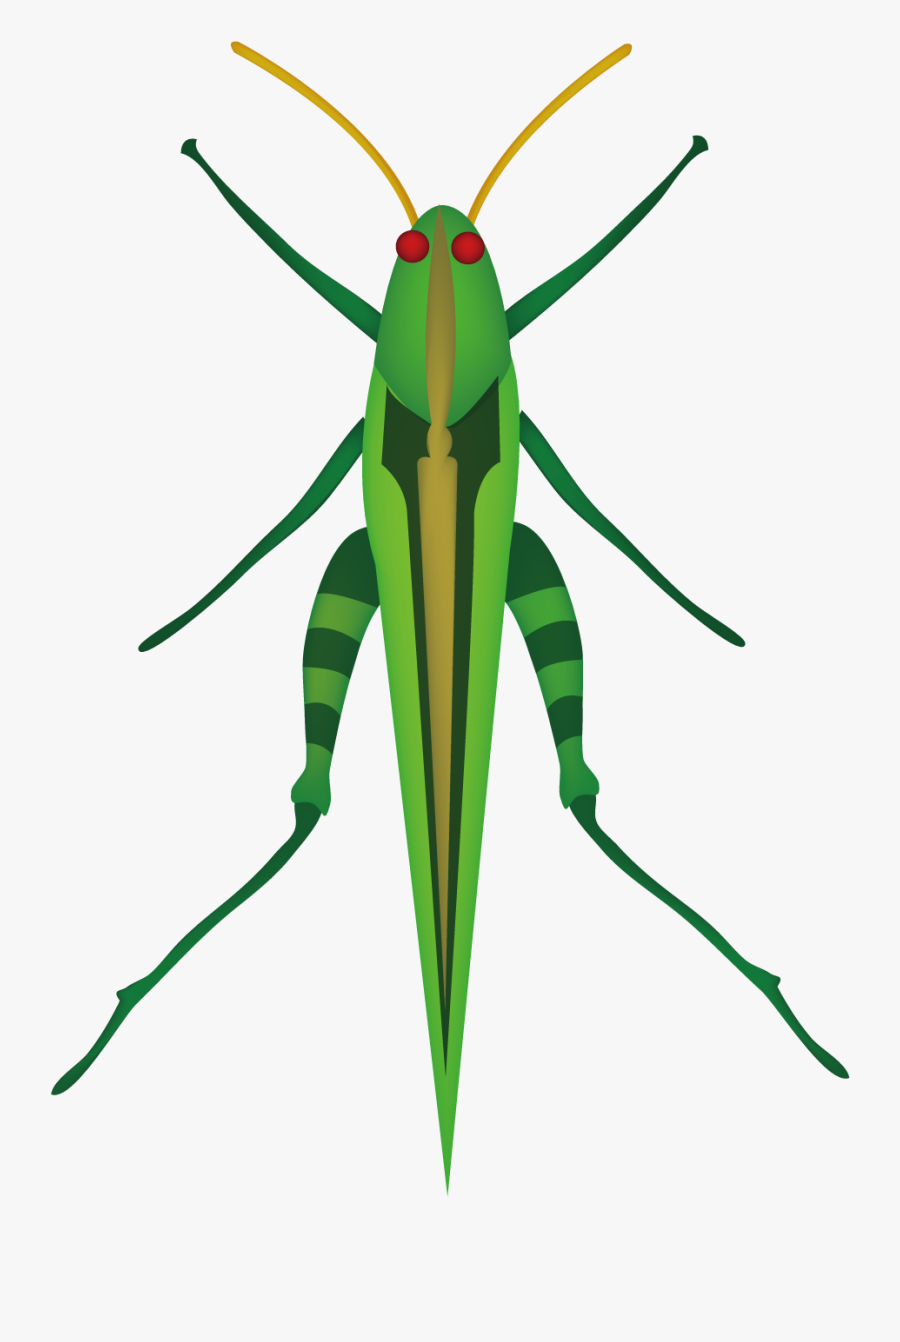 Locust Clipart Cricket Insect - Top View Of A Grasshopper, Transparent Clipart